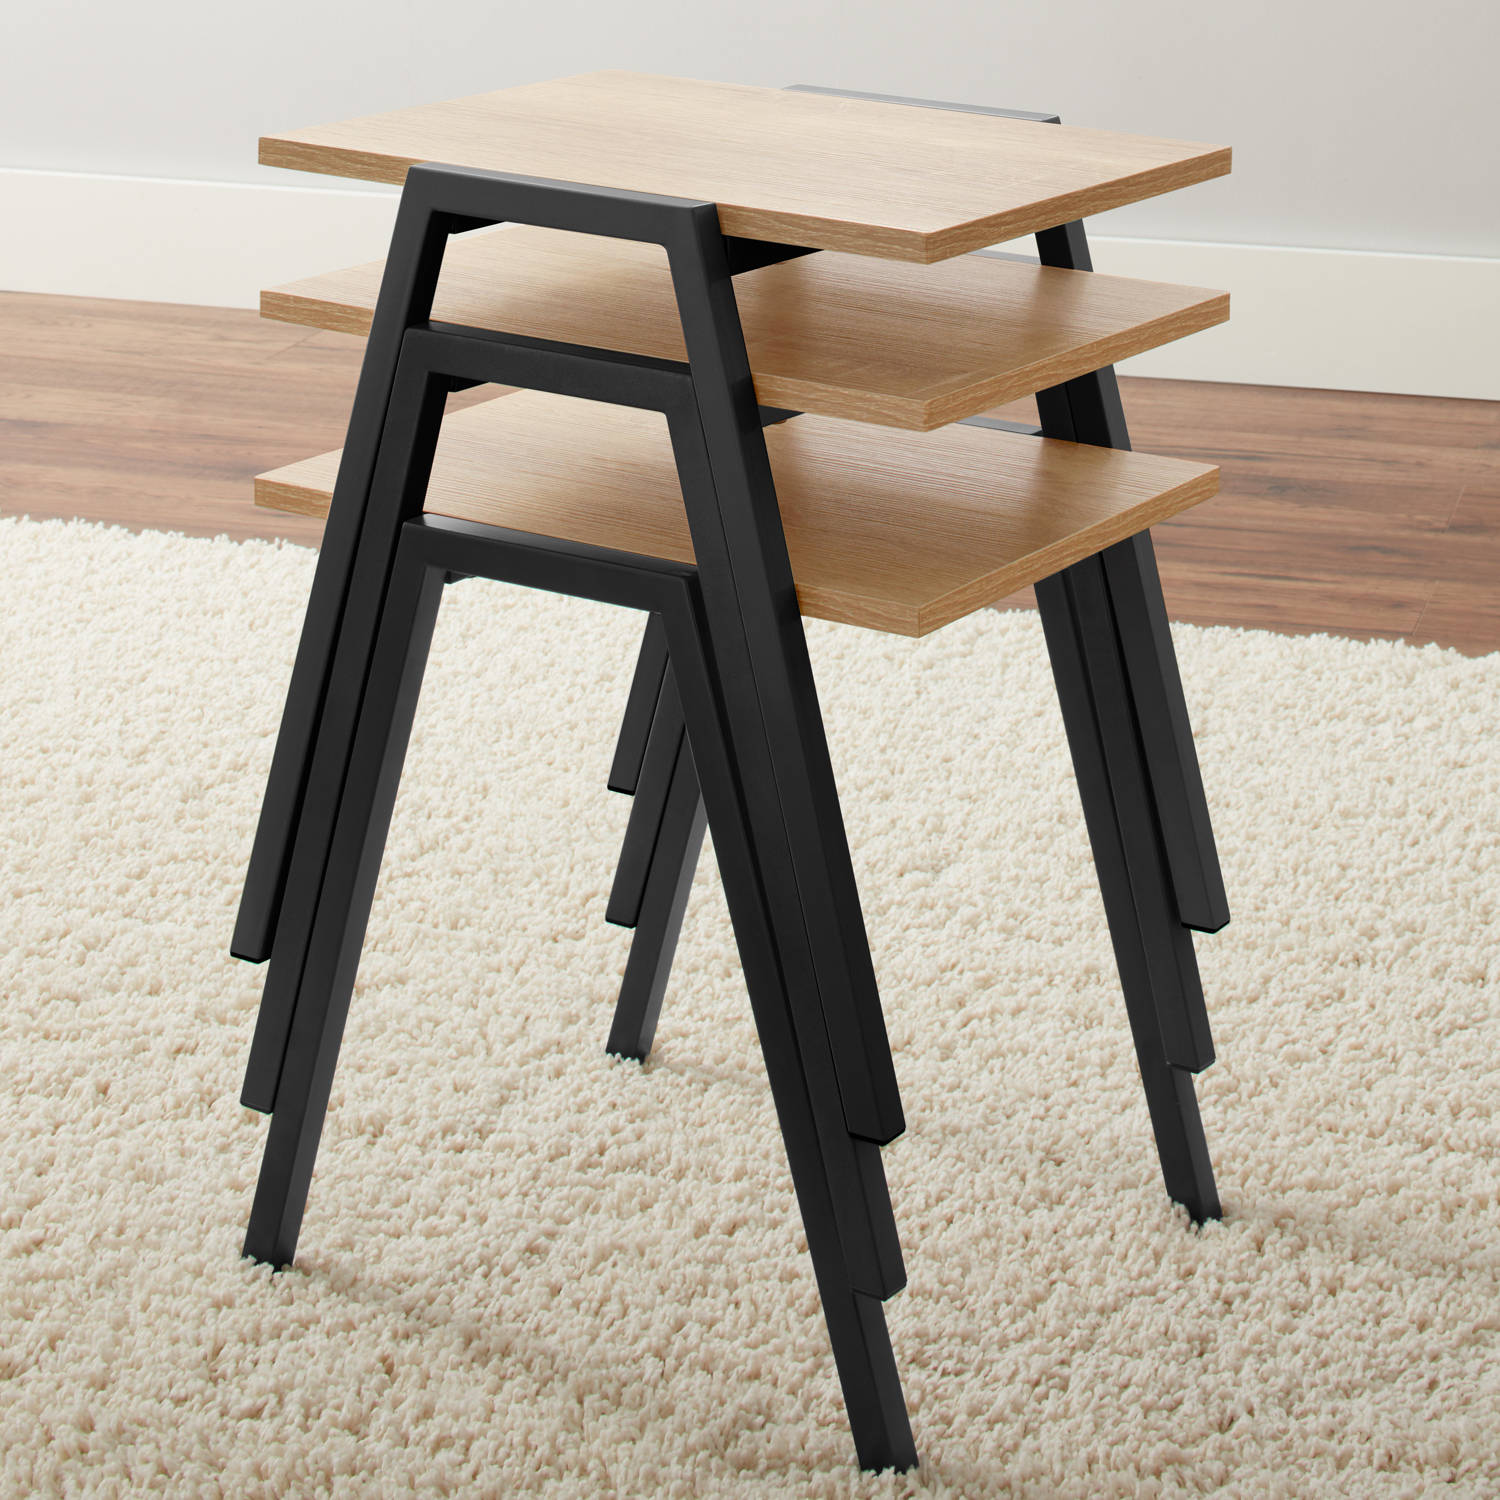 Mainstays Conrad Stacking Side Table, Assorted Colors - image 3 of 5